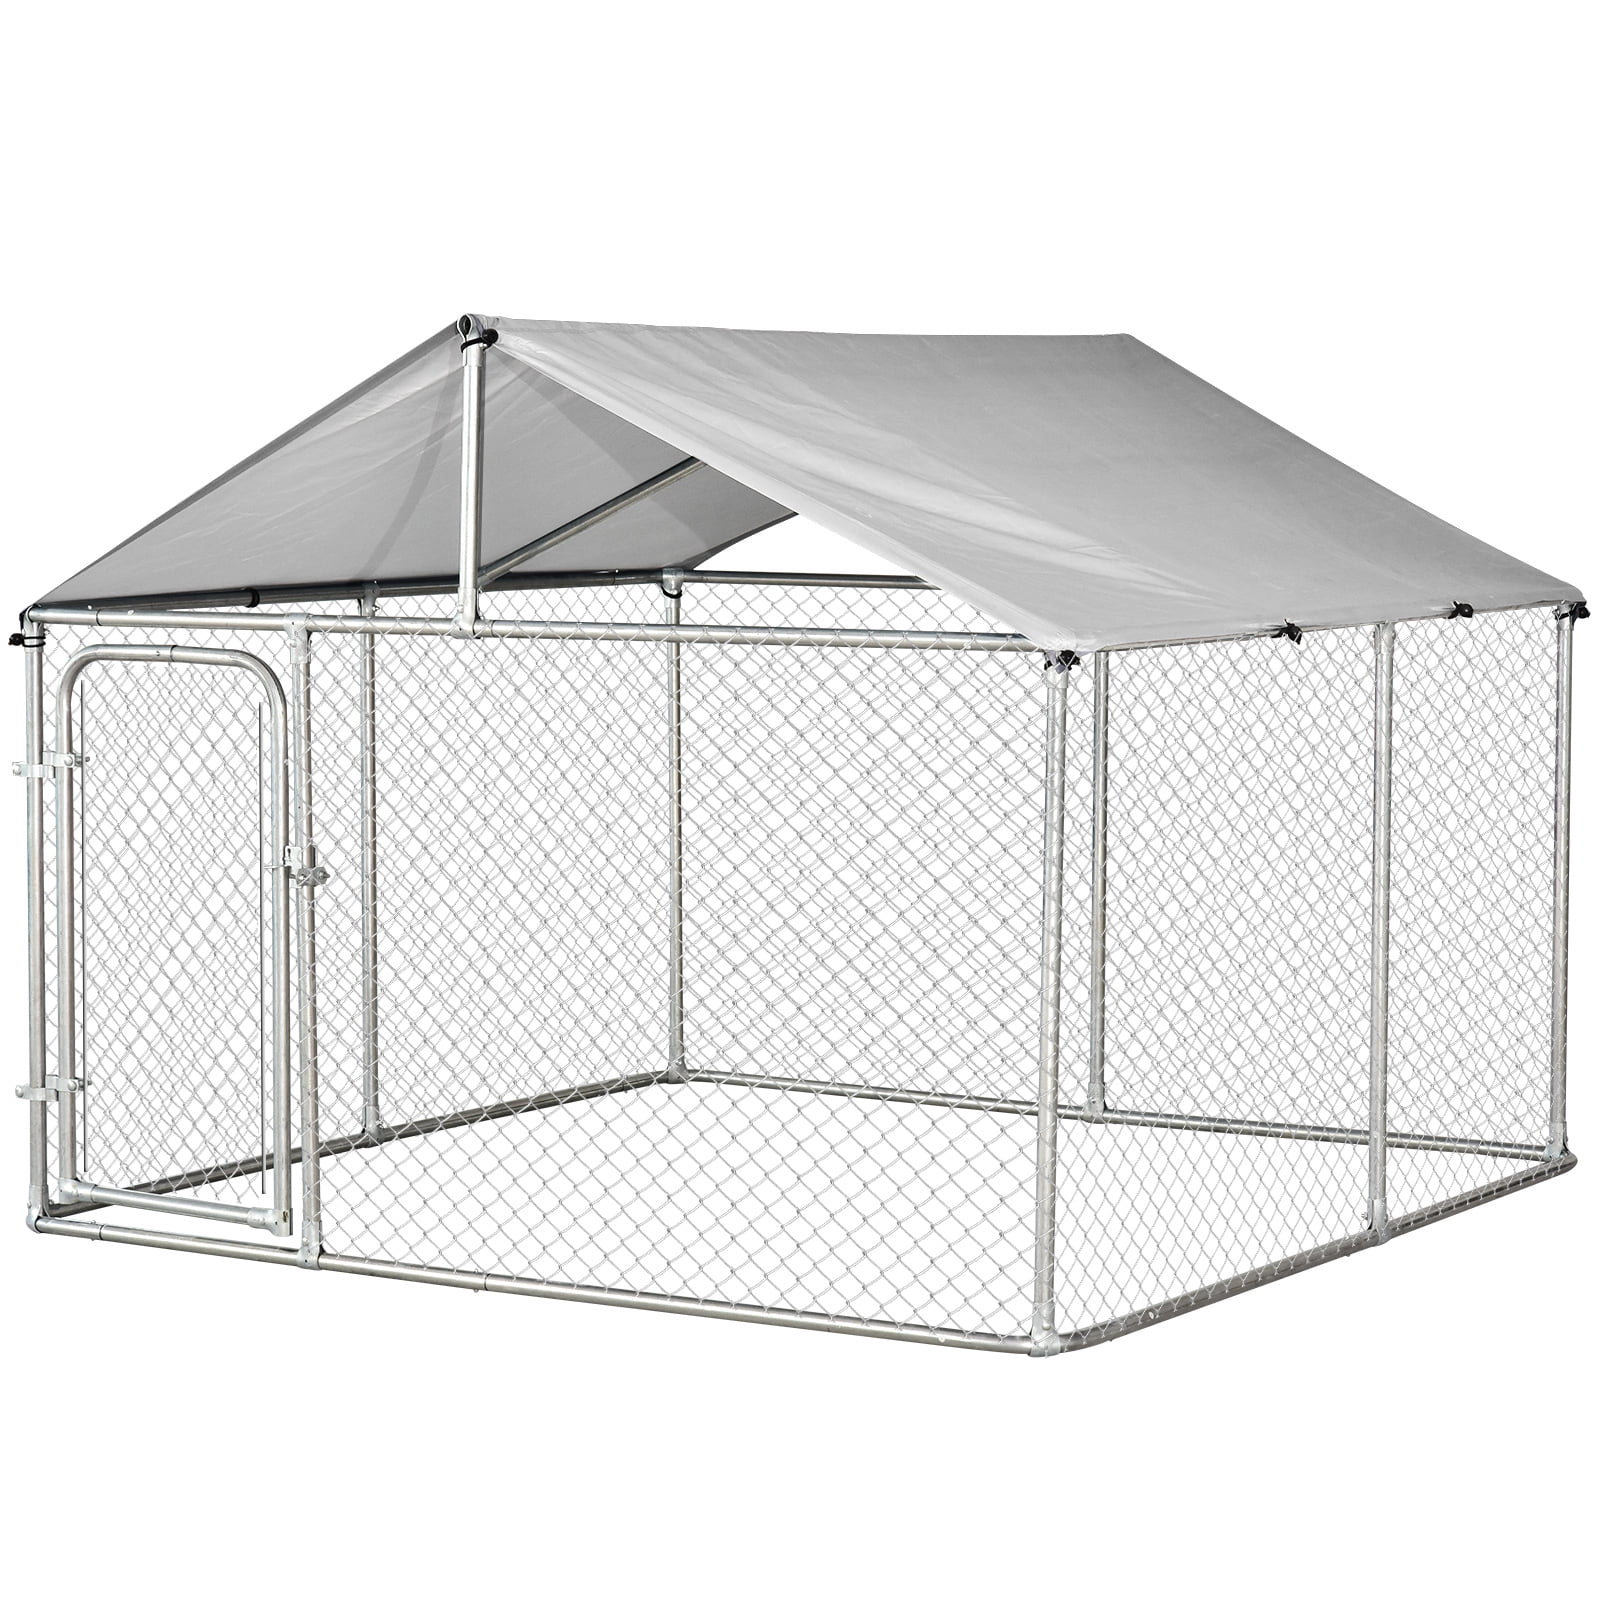 large dog kennel outdoor